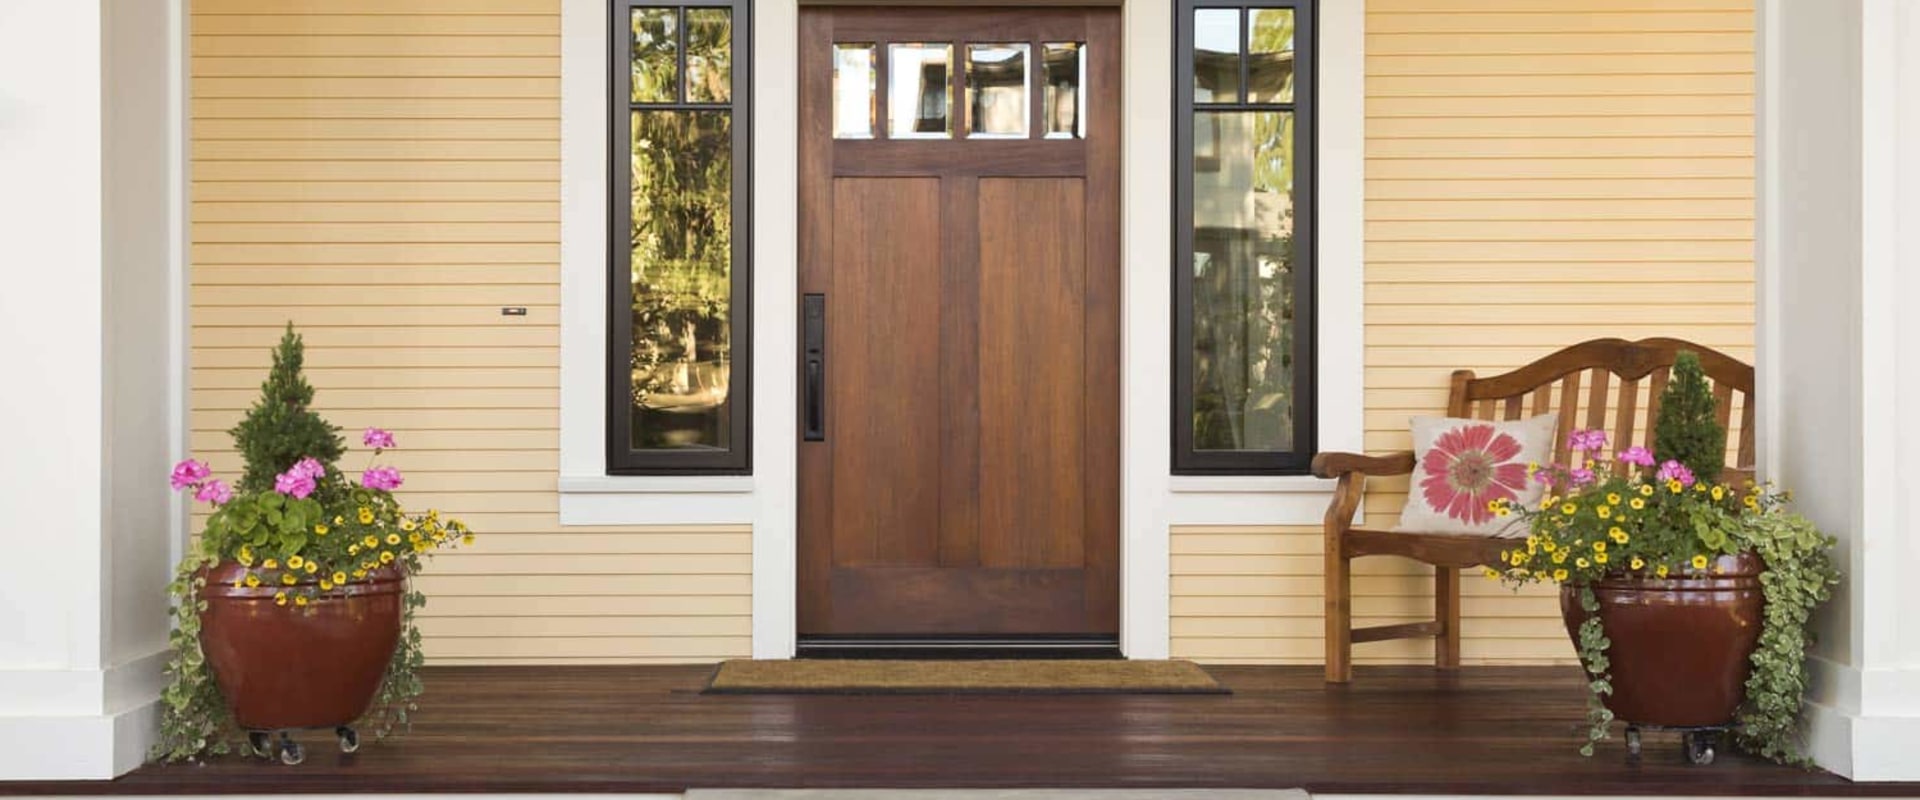 How to Choose the Perfect Decorative Hardware for Your Entryway